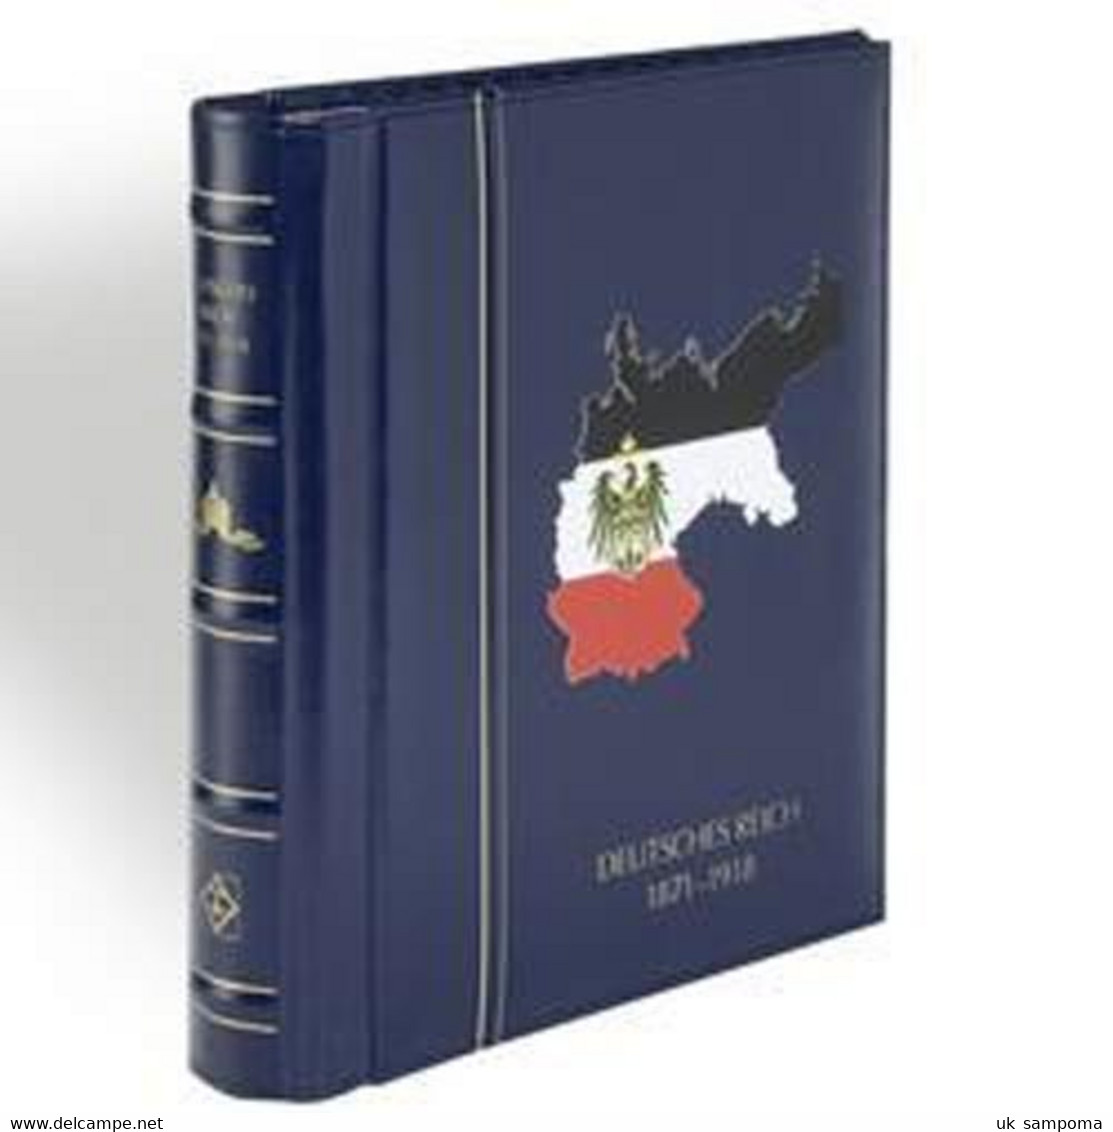 Turn-bar Binder PERFECT DP, Classic Design,German Reich (Empire)1871-1918 Incl. Slipcase - Large Format, Black Pages